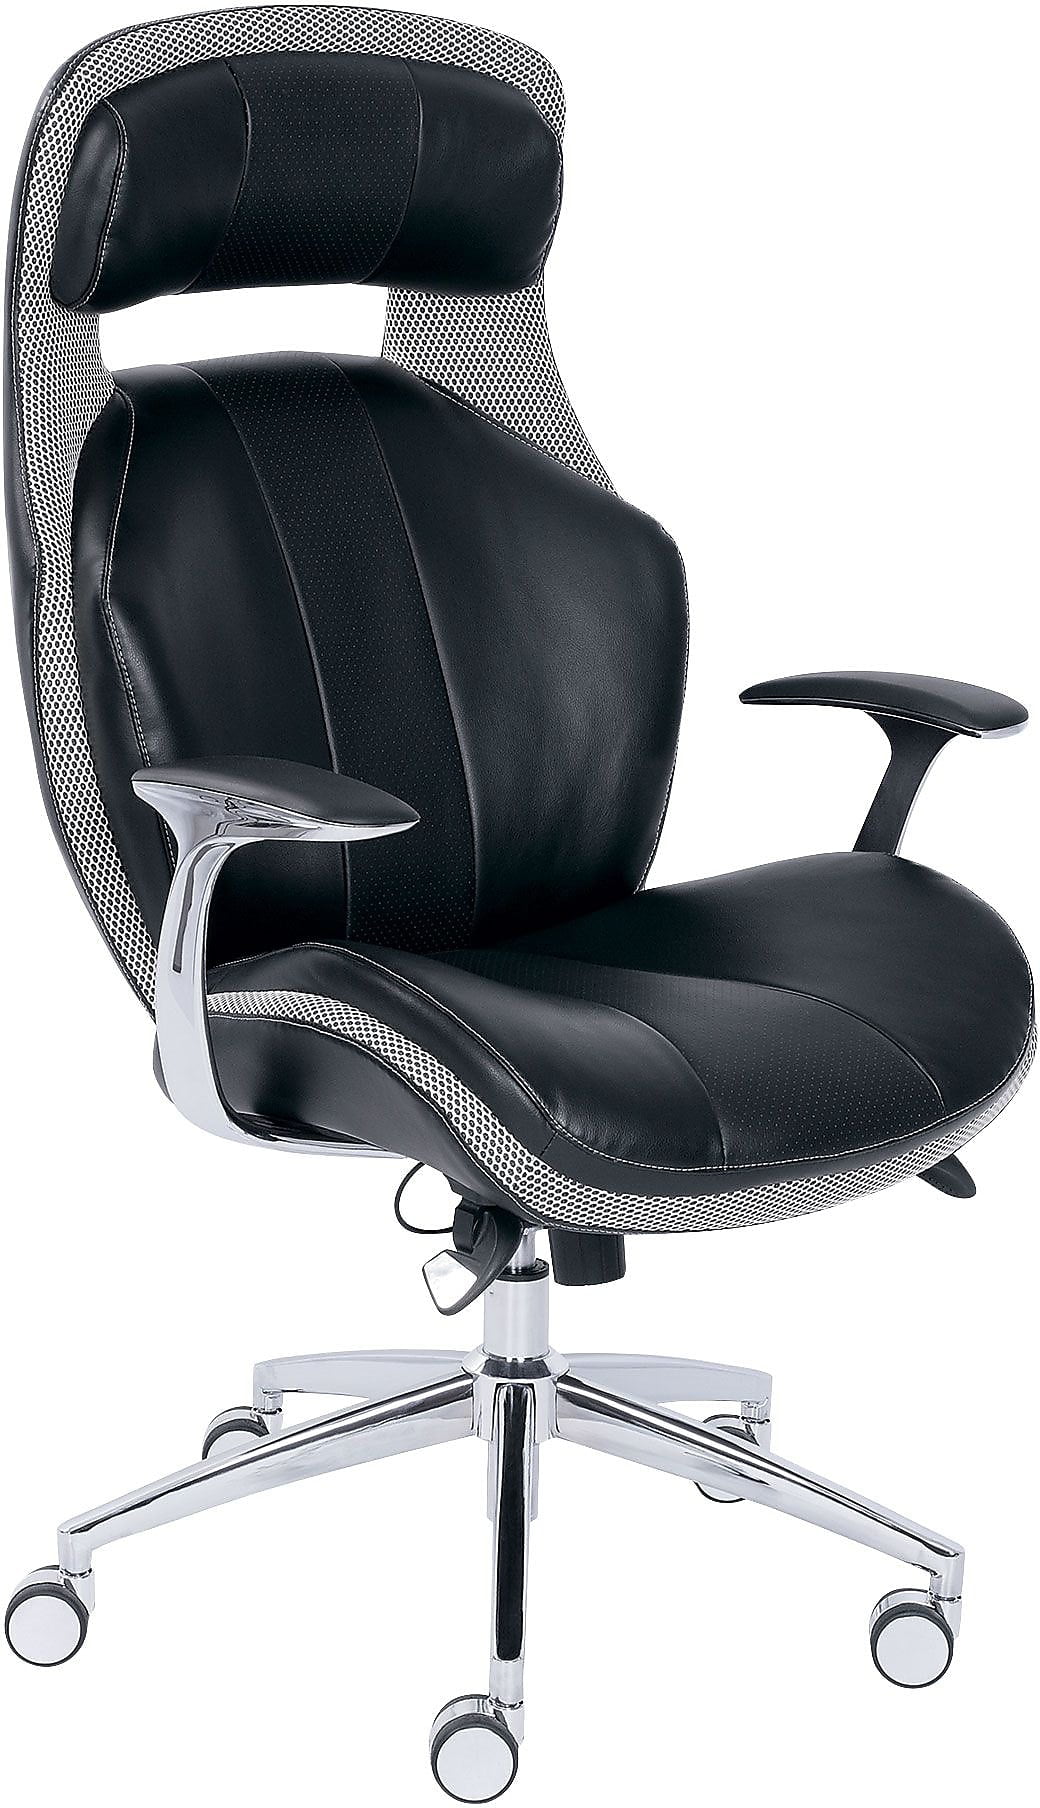 Lazy Boy Manager Chair Manual